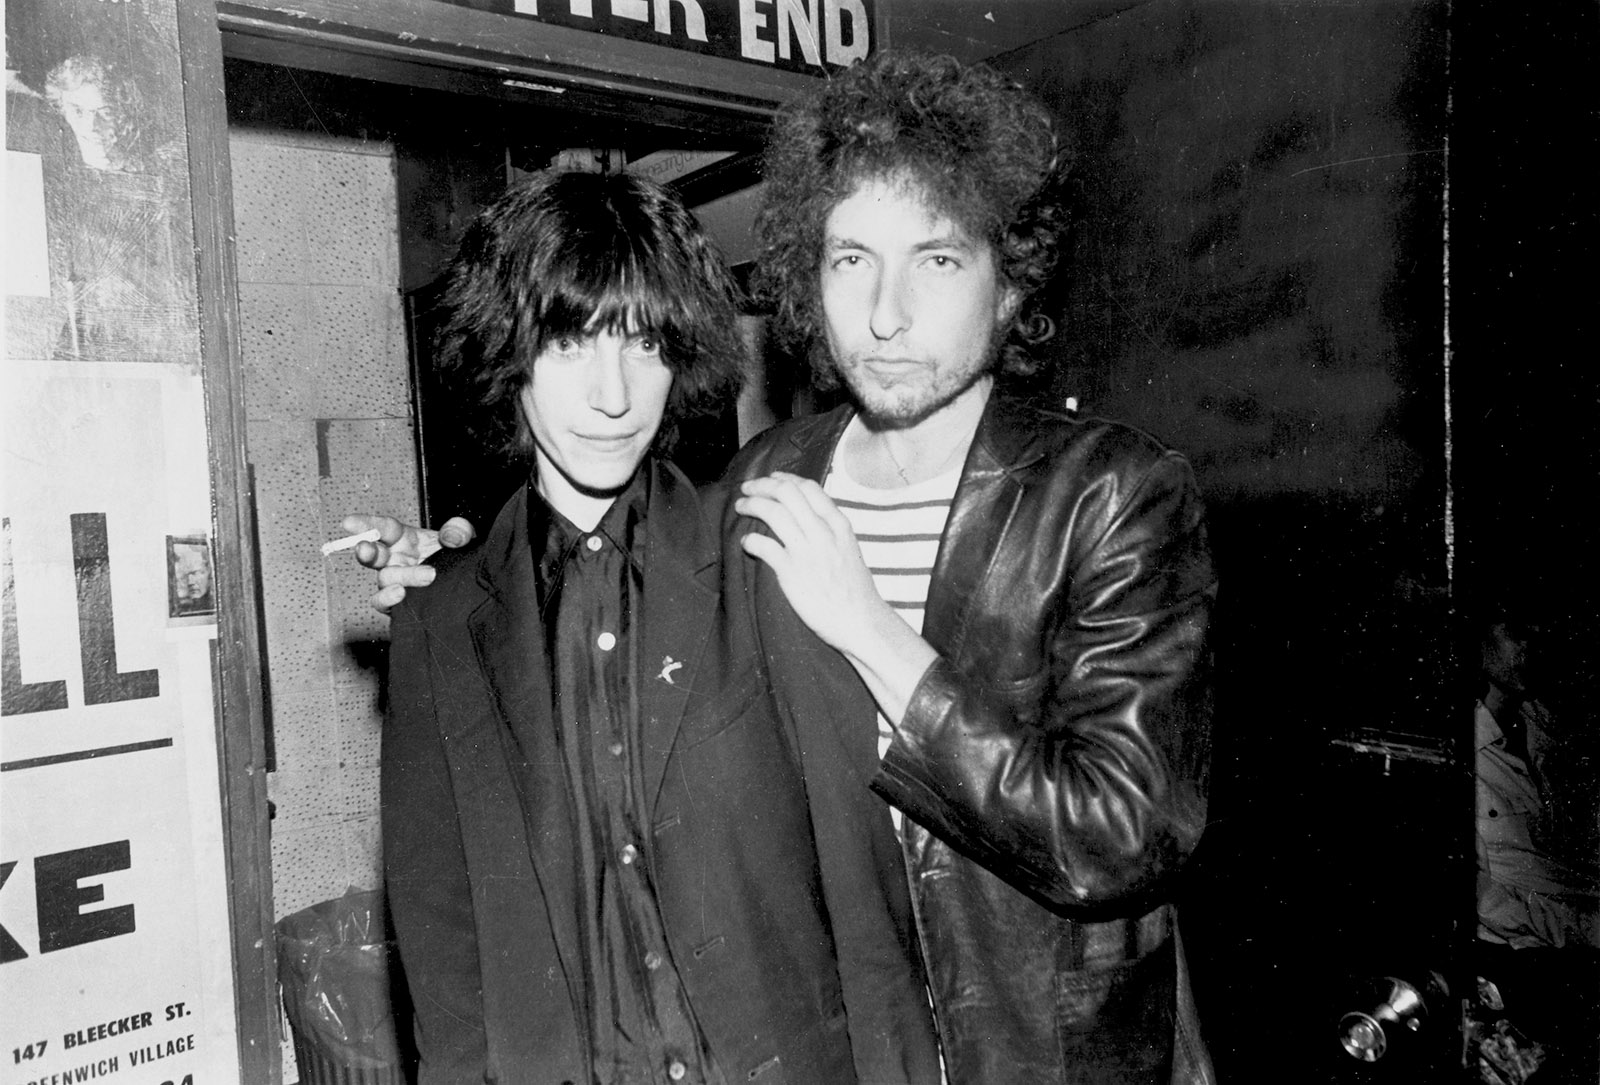 Patti Smith and Bob Dylan at the Bitter End on the night they first met, New York City, June 1975